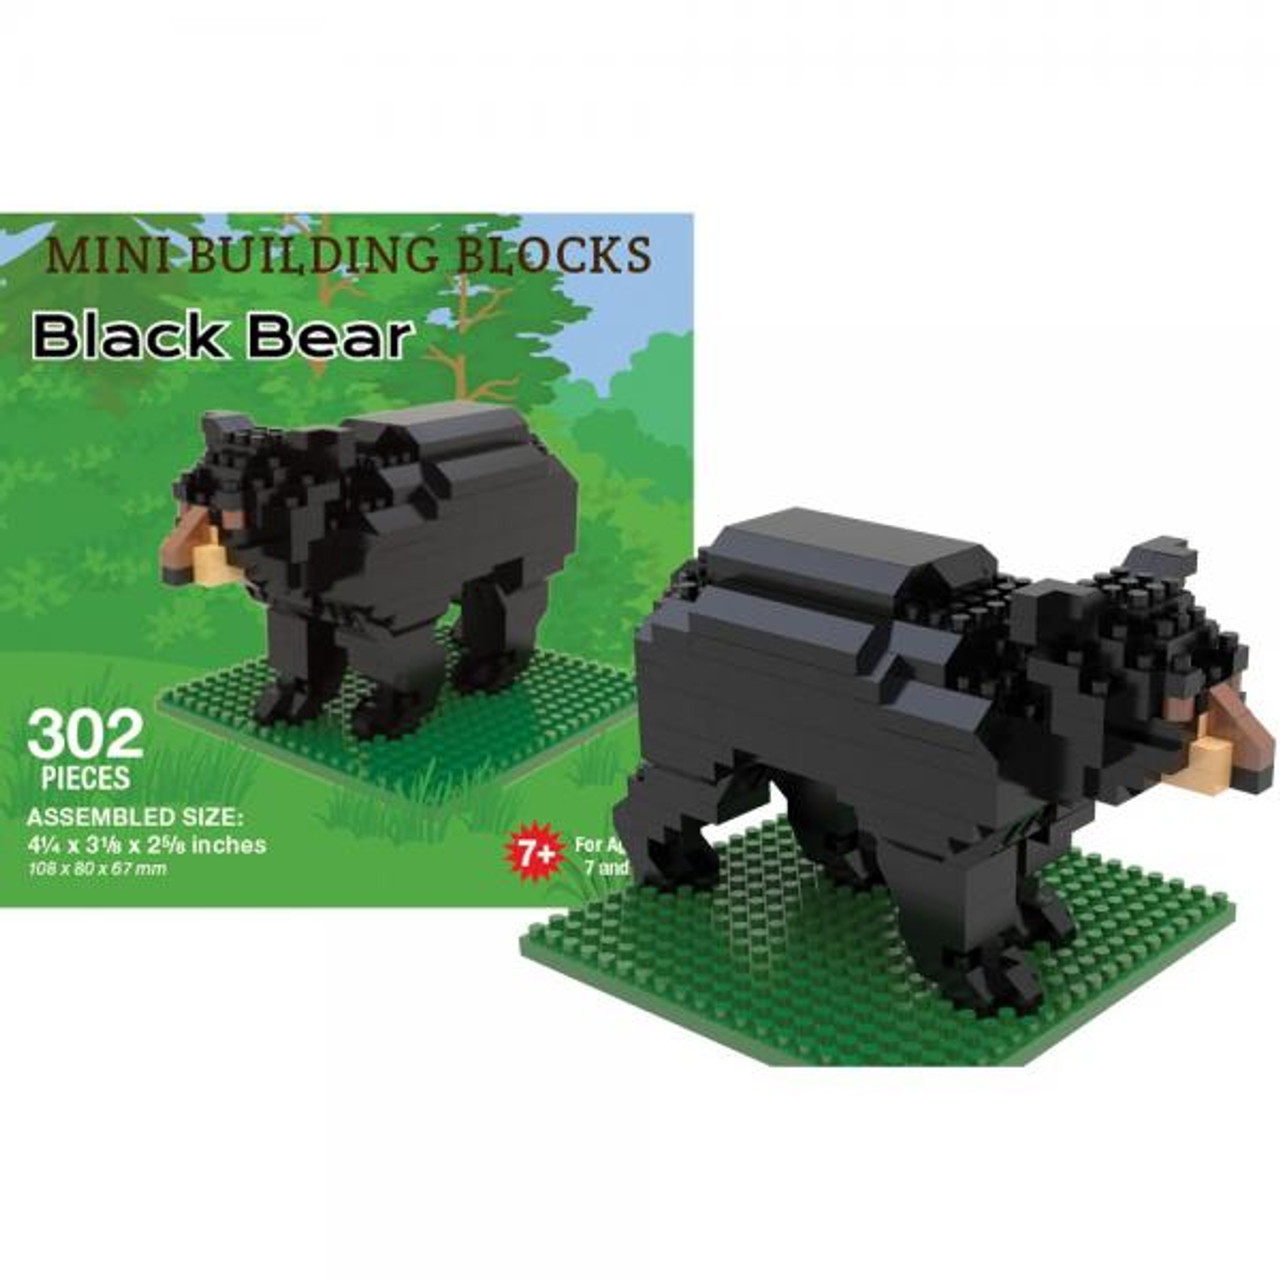 Brickfinder - LEGO Jigsaw Puzzles To While The Time Away!